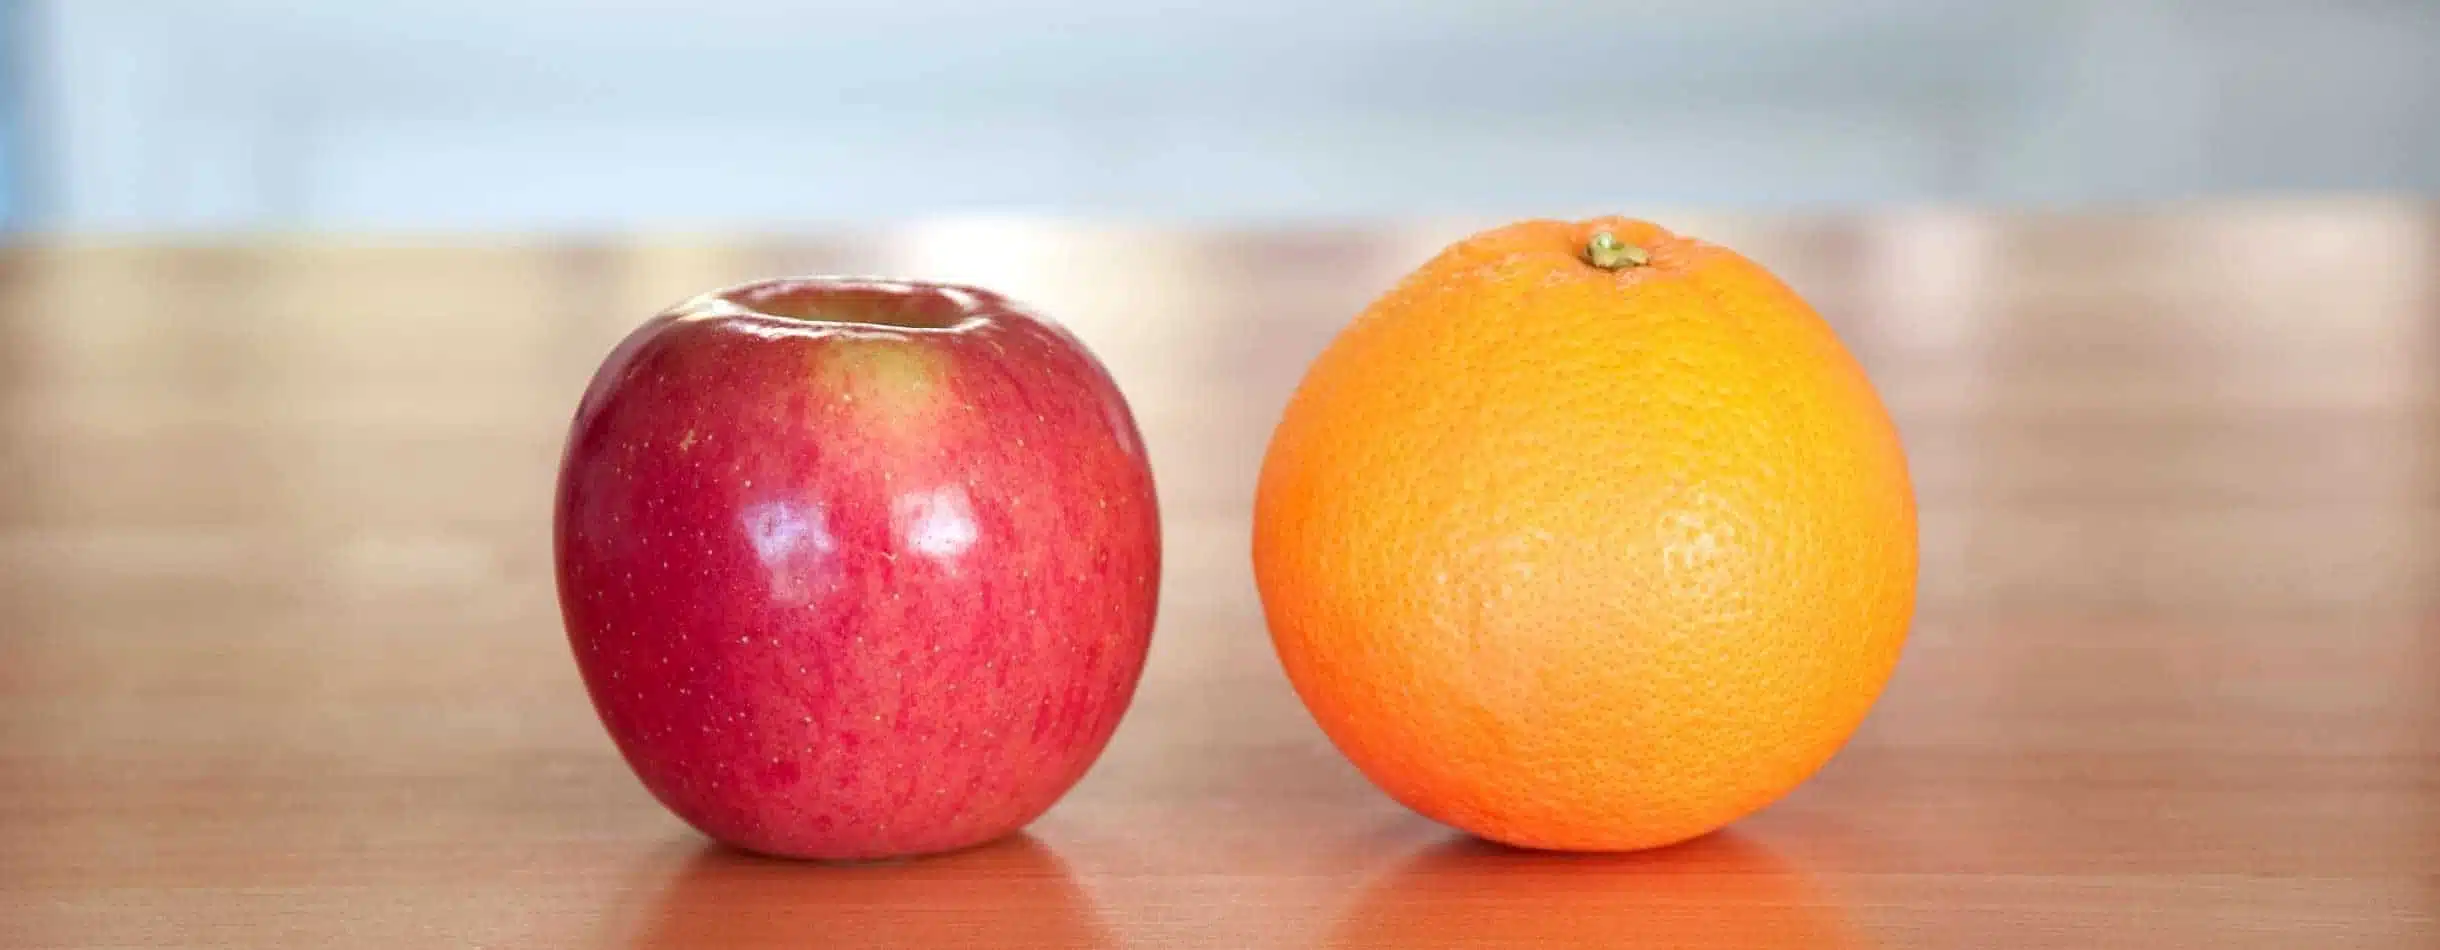 Apples to Oranges. A red apple and an orange lay next to one another on a table.